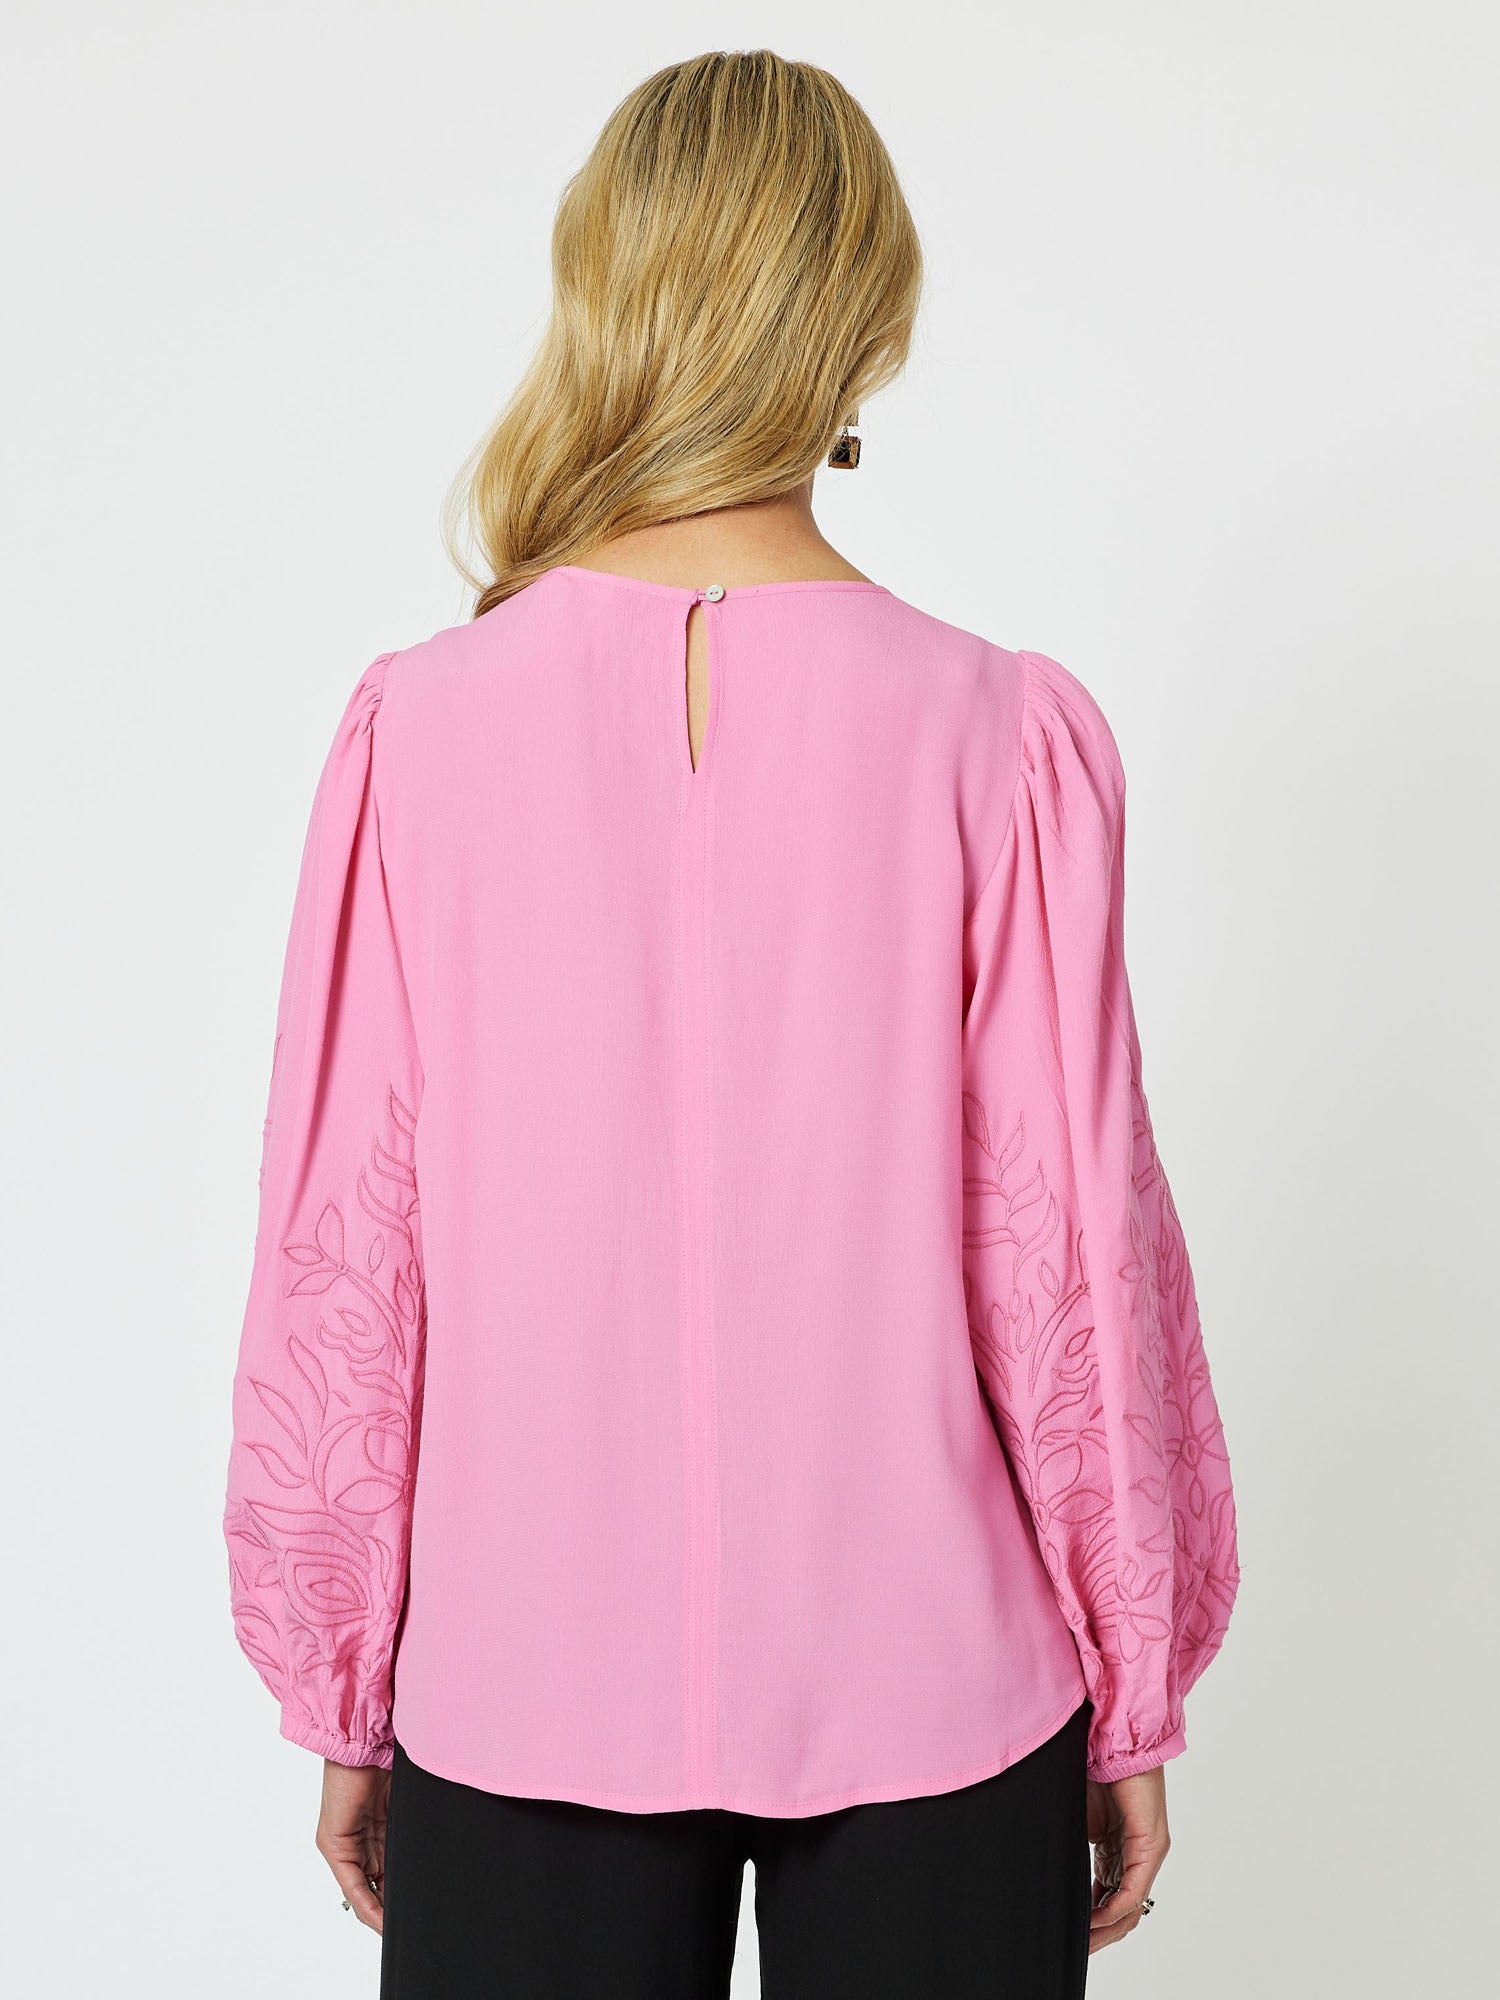 Saint Germain Embroidered Top - Candy